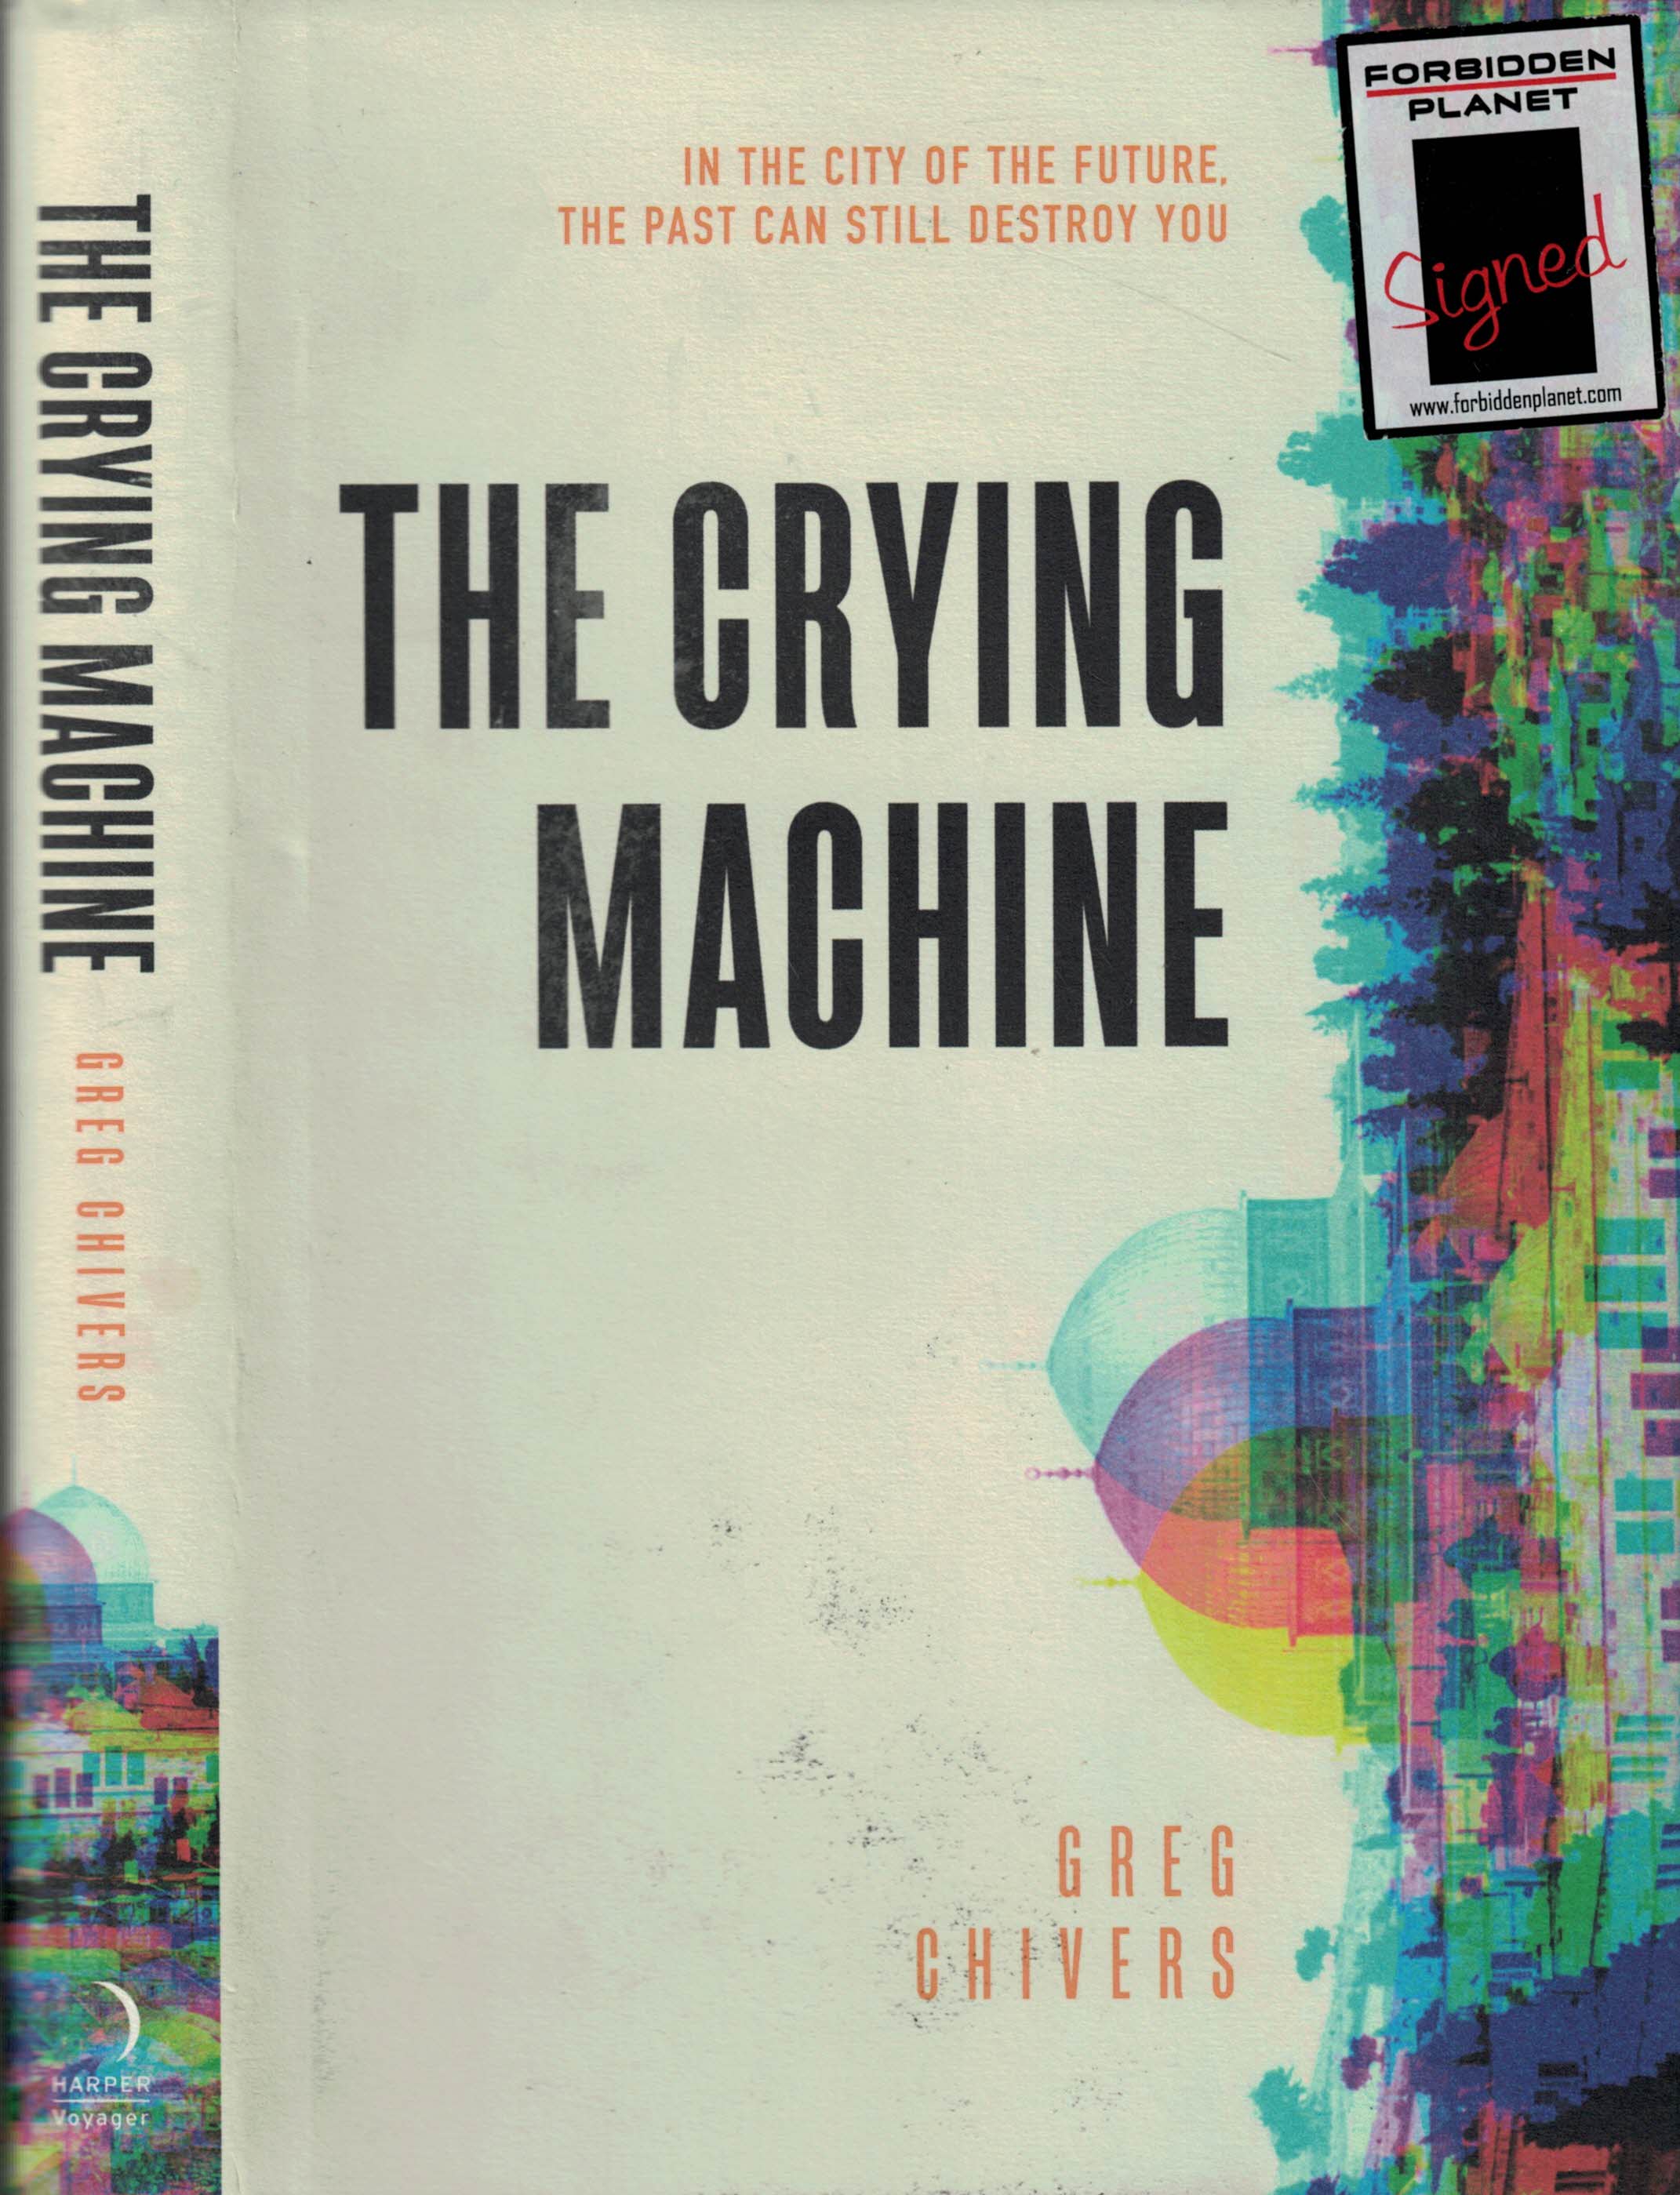 The Crying Machine. Signed copy.